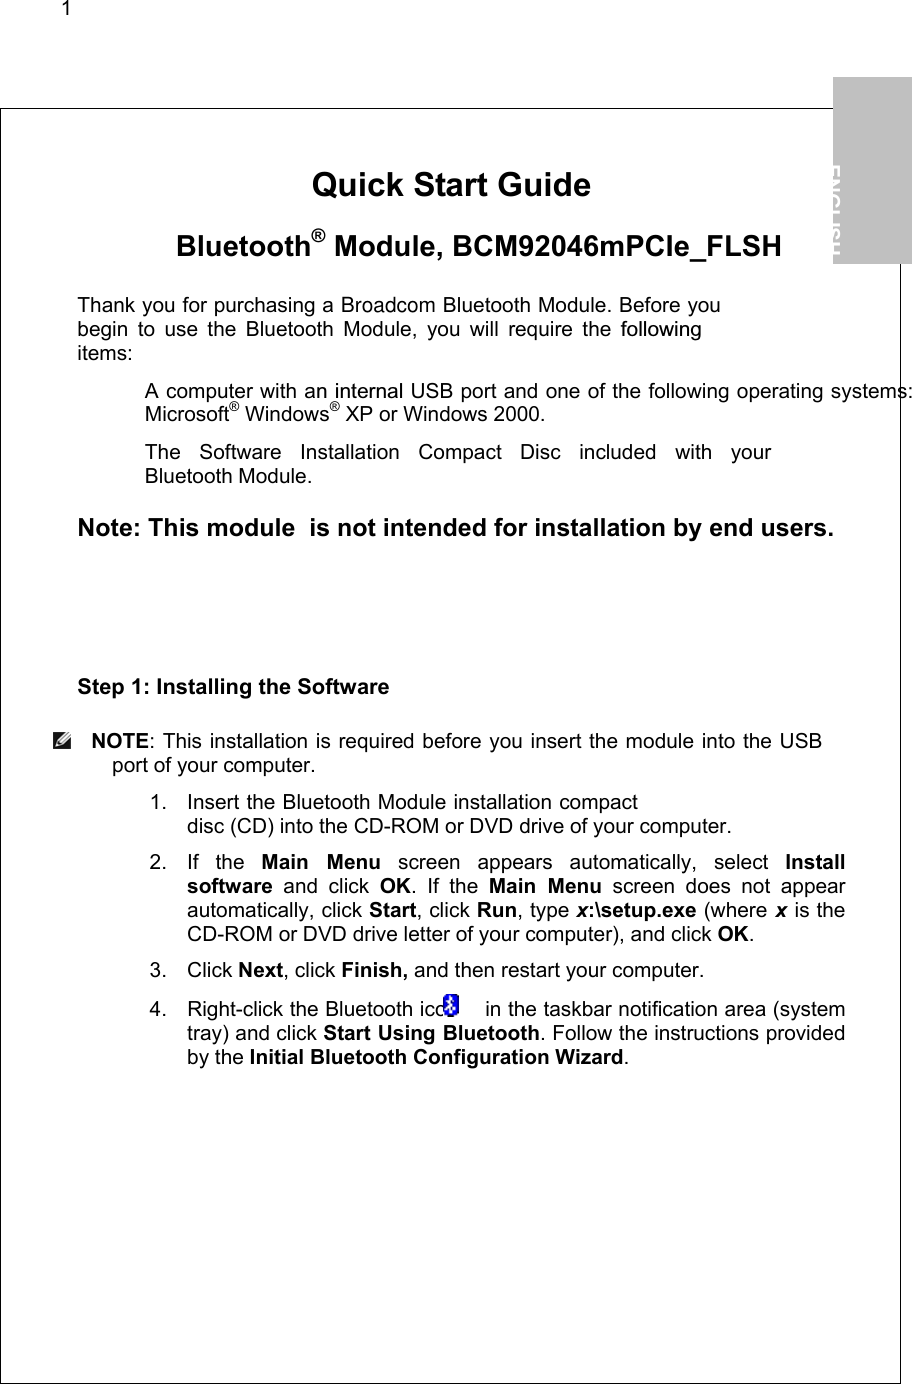 1        Quick Start Guide   Bluetooth® Module, BCM92046mPCIe_FLSH  Thank you for purchasing a Broadcom Bluetooth Module. Before you begin to use the Bluetooth Module, you will require the followingitems:   A computer with an internal USB port and one of the following operating systems: Microsoft® Windows® XP or Windows 2000.   The Software Installation Compact Disc included with your  Bluetooth Module.  Note: This module  is not intended for installation by end users.  Step 1: Installing the Software  NOTE: This installation is required before you insert the module into the USB port of your computer. 1. Insert the Bluetooth Module installation compact disc (CD) into the CD-ROM or DVD drive of your computer. 2. If the Main Menu screen appears automatically, select Install software and click OK. If the Main Menu screen does not appear automatically, click Start, click Run, type x:\setup.exe (where x is the CD-ROM or DVD drive letter of your computer), and click OK. 3. Click Next, click Finish, and then restart your computer. 4.  Right-click the Bluetooth icon   in the taskbar notification area (system tray) and click Start Using Bluetooth. Follow the instructions provided by the Initial Bluetooth Configuration Wizard.   1.           ENGLISH  